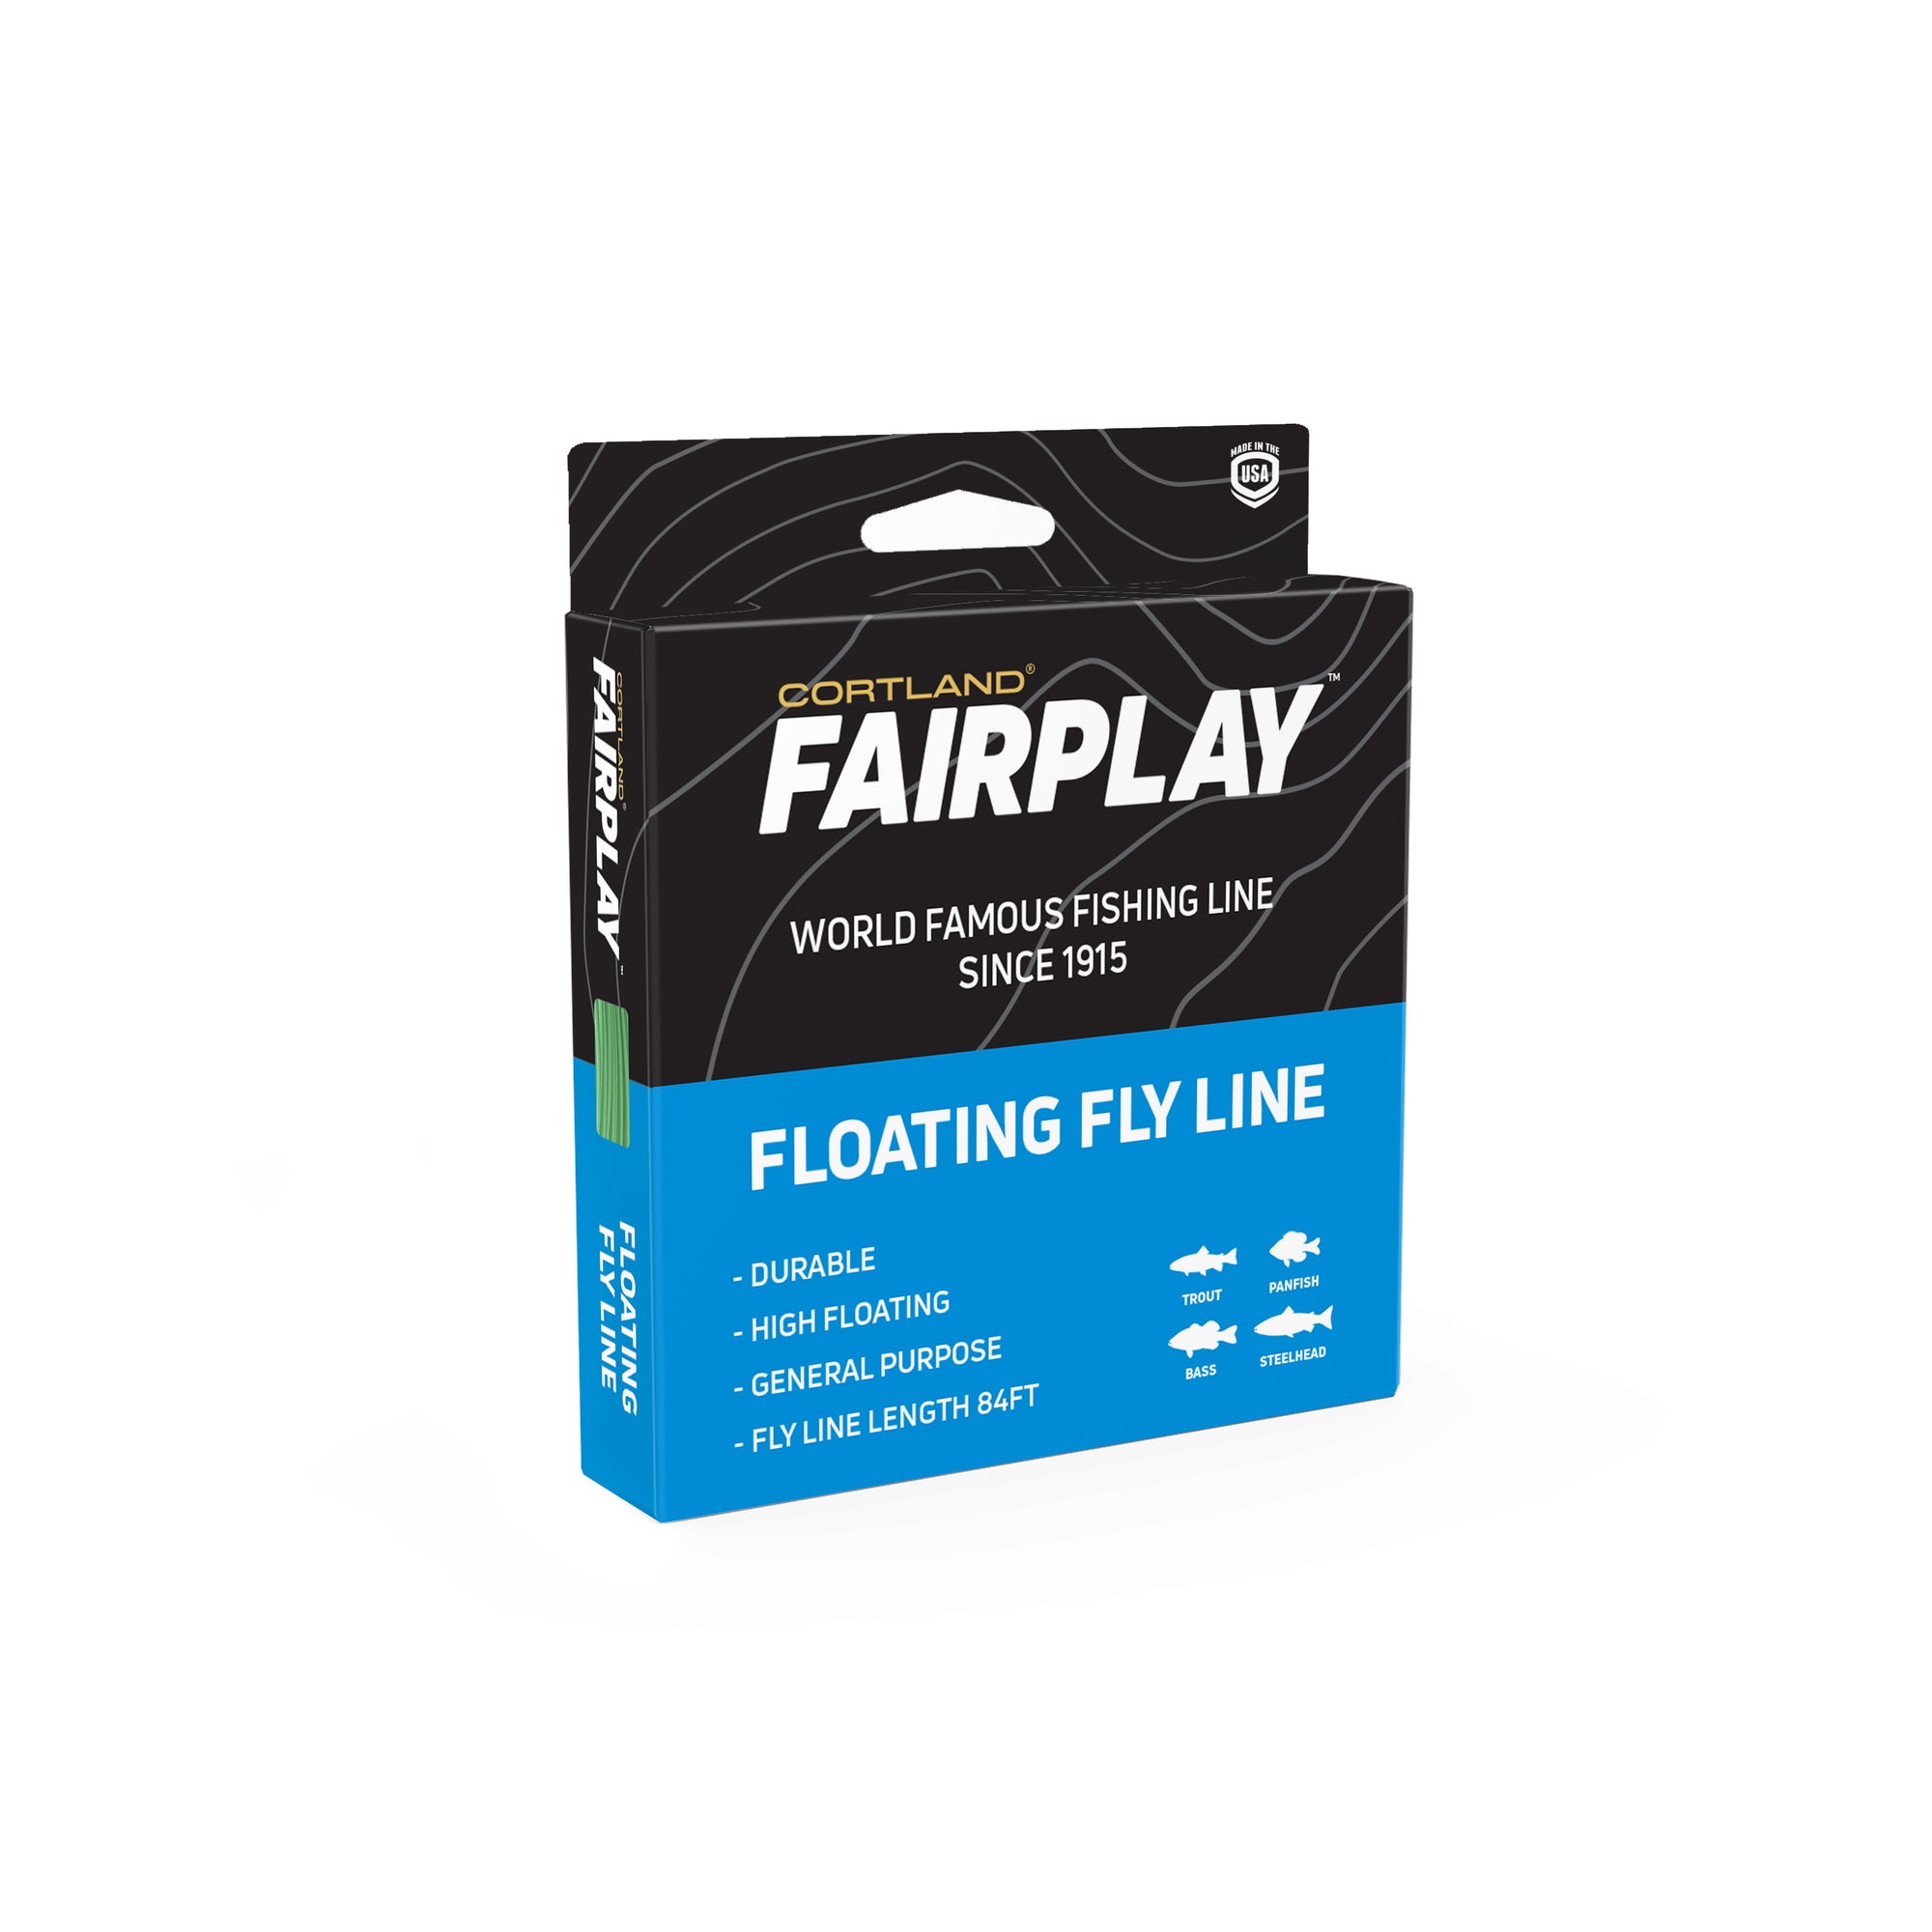  Blue Floating 5F WF Fly Fishing Line Kit 5WT Fly Fishing Line  Leader Braided Backing Fish Line